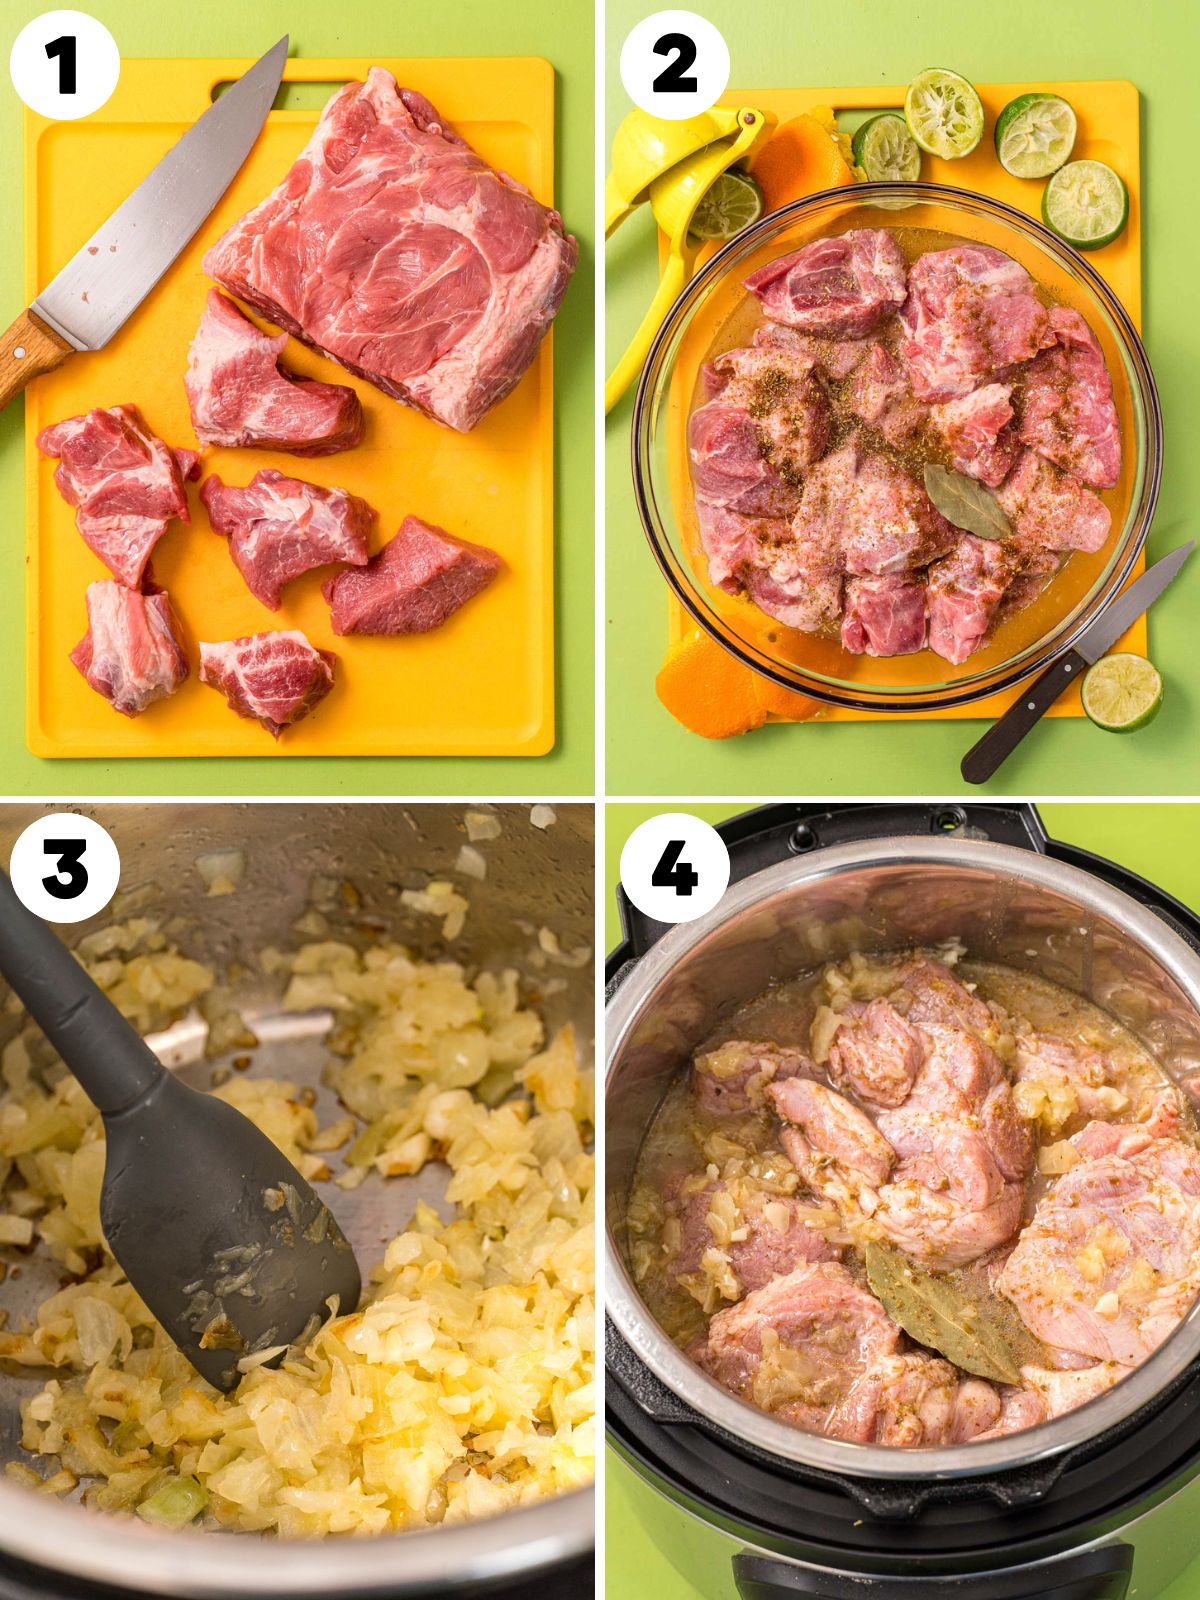 Step by step photos of preparing instant pot carnitas. 1. Cutting pork 2. Marinating the pork in citrus juice 3. Sauteeing oniosn in the instant pot. 4. Adding pork and marinade to instant pot.